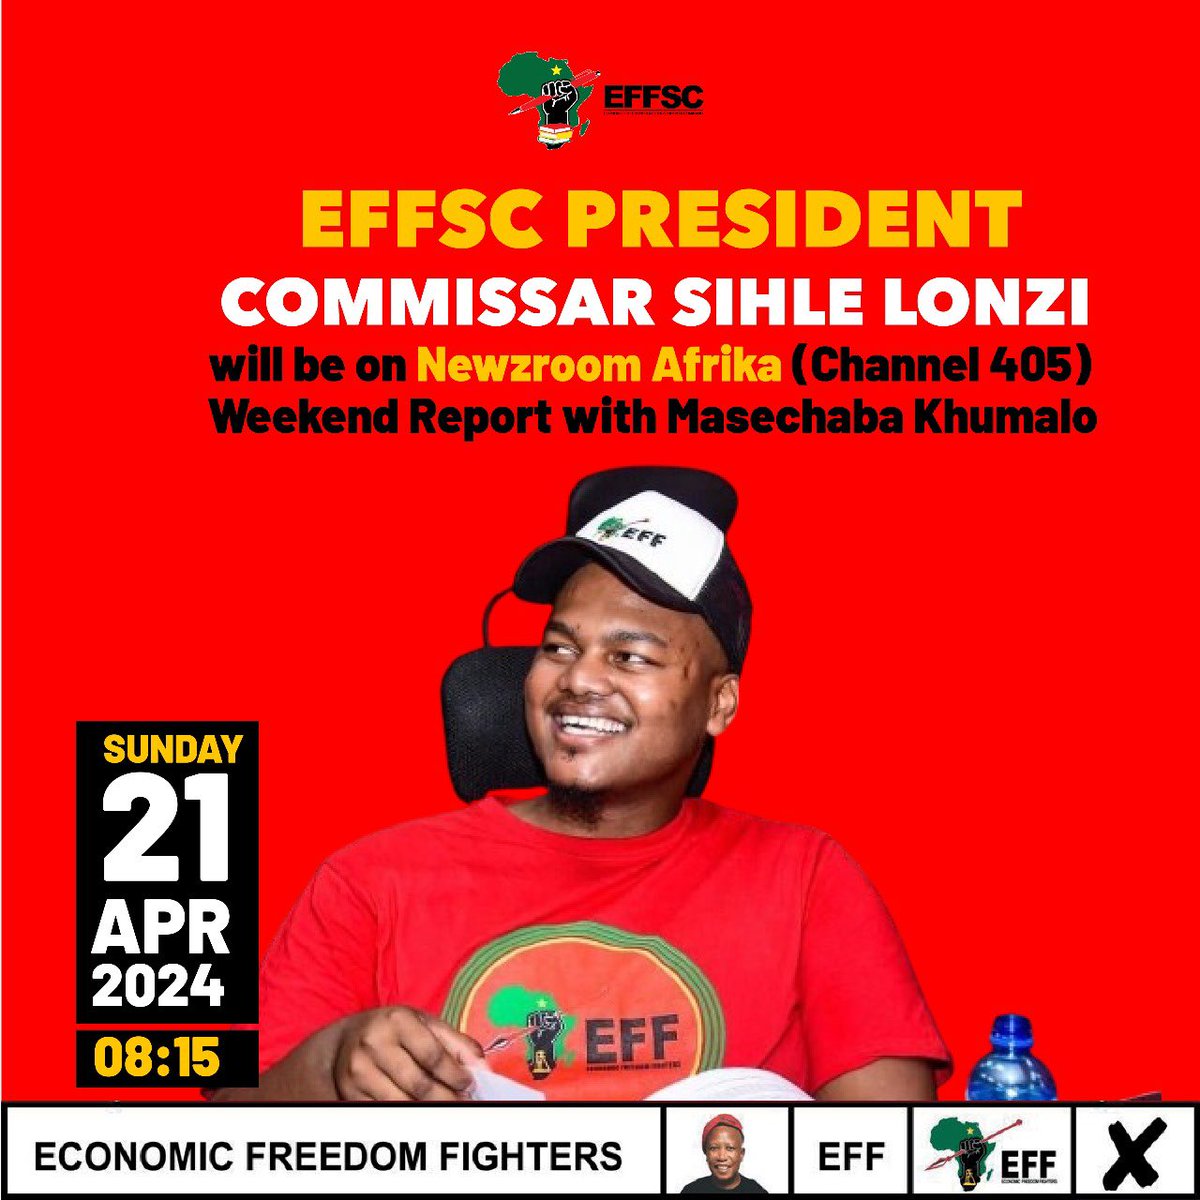 ♦️COMING UP♦️ The EFFSC President, Commissar @SihleLonzi, will be live on Newzroom Afrika 405 Weekend Report with Masechaba Khumalo. #2024IsOur1994 #Vote2024